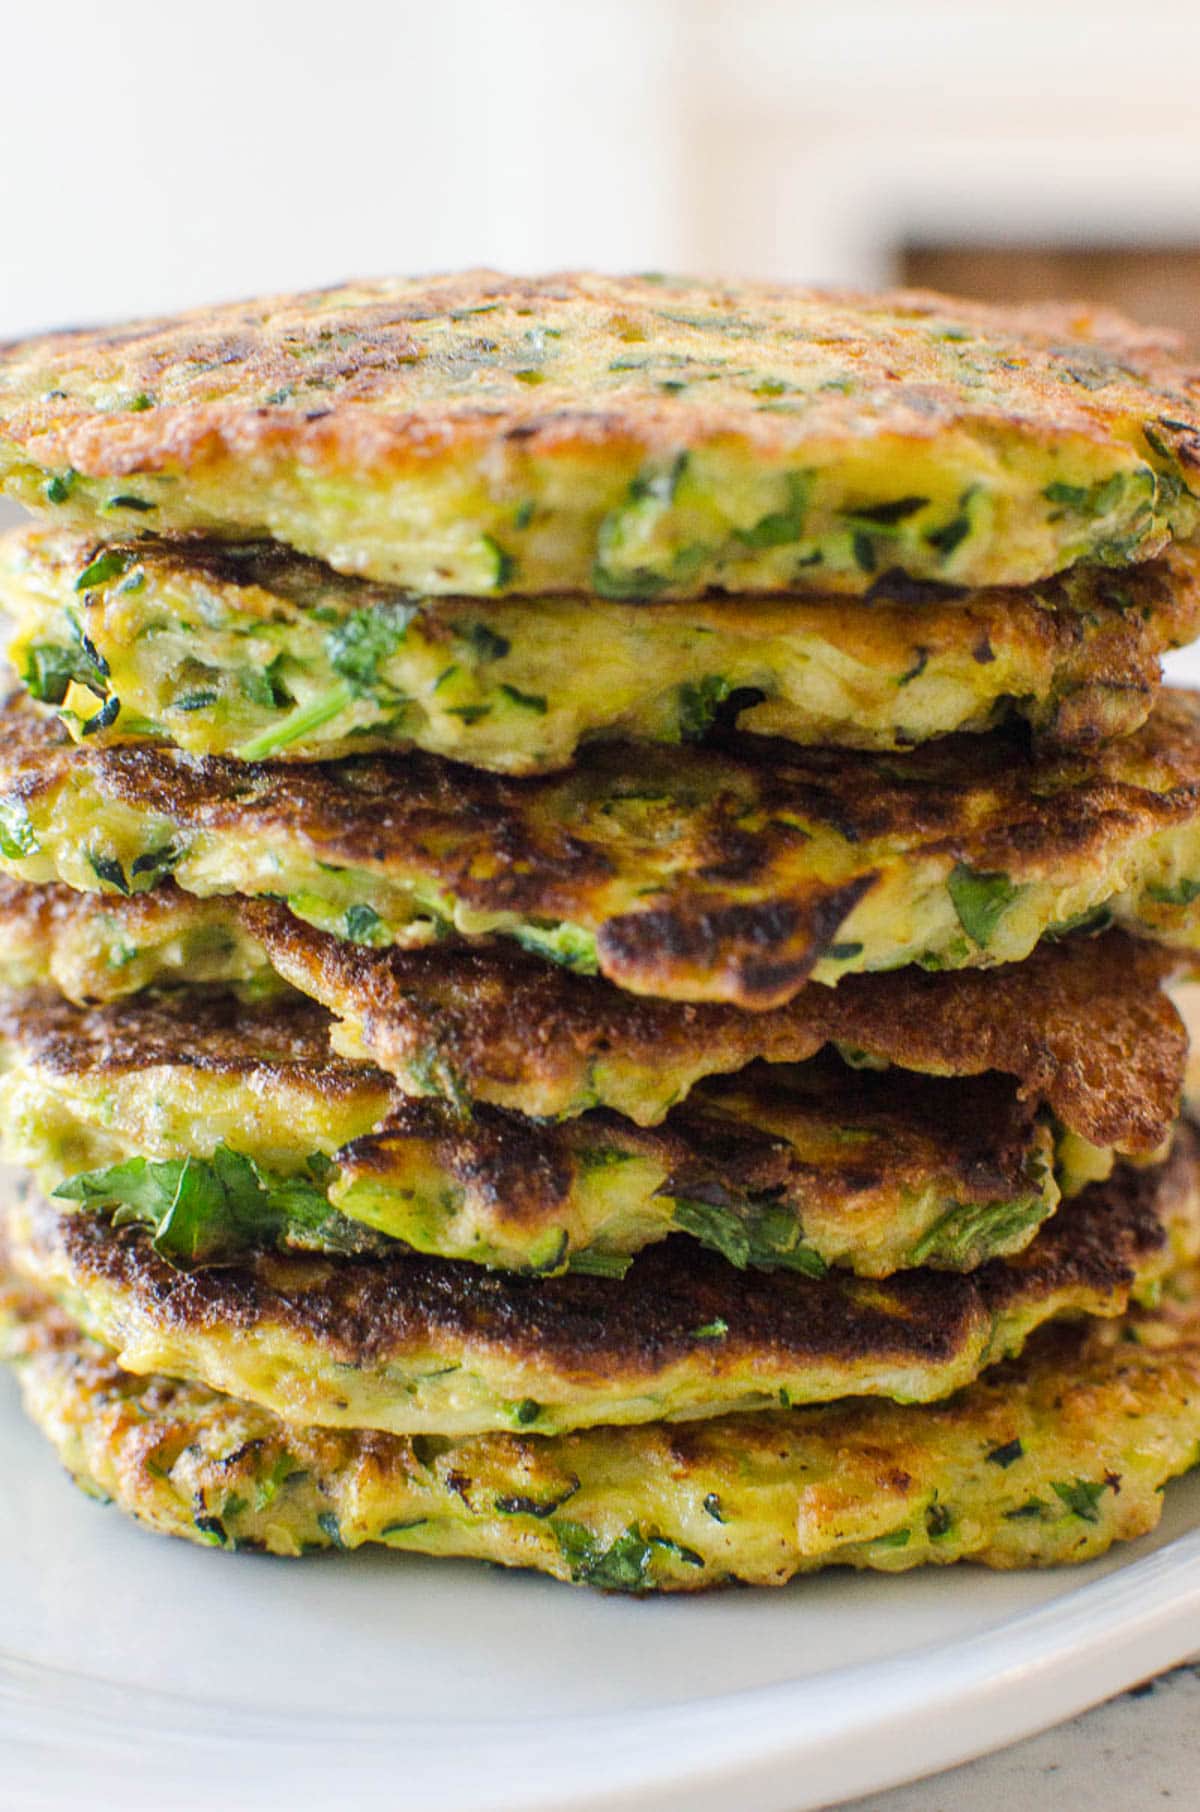 Closeup of baked zucchini fritters showing texture with lots of parsley stacked.